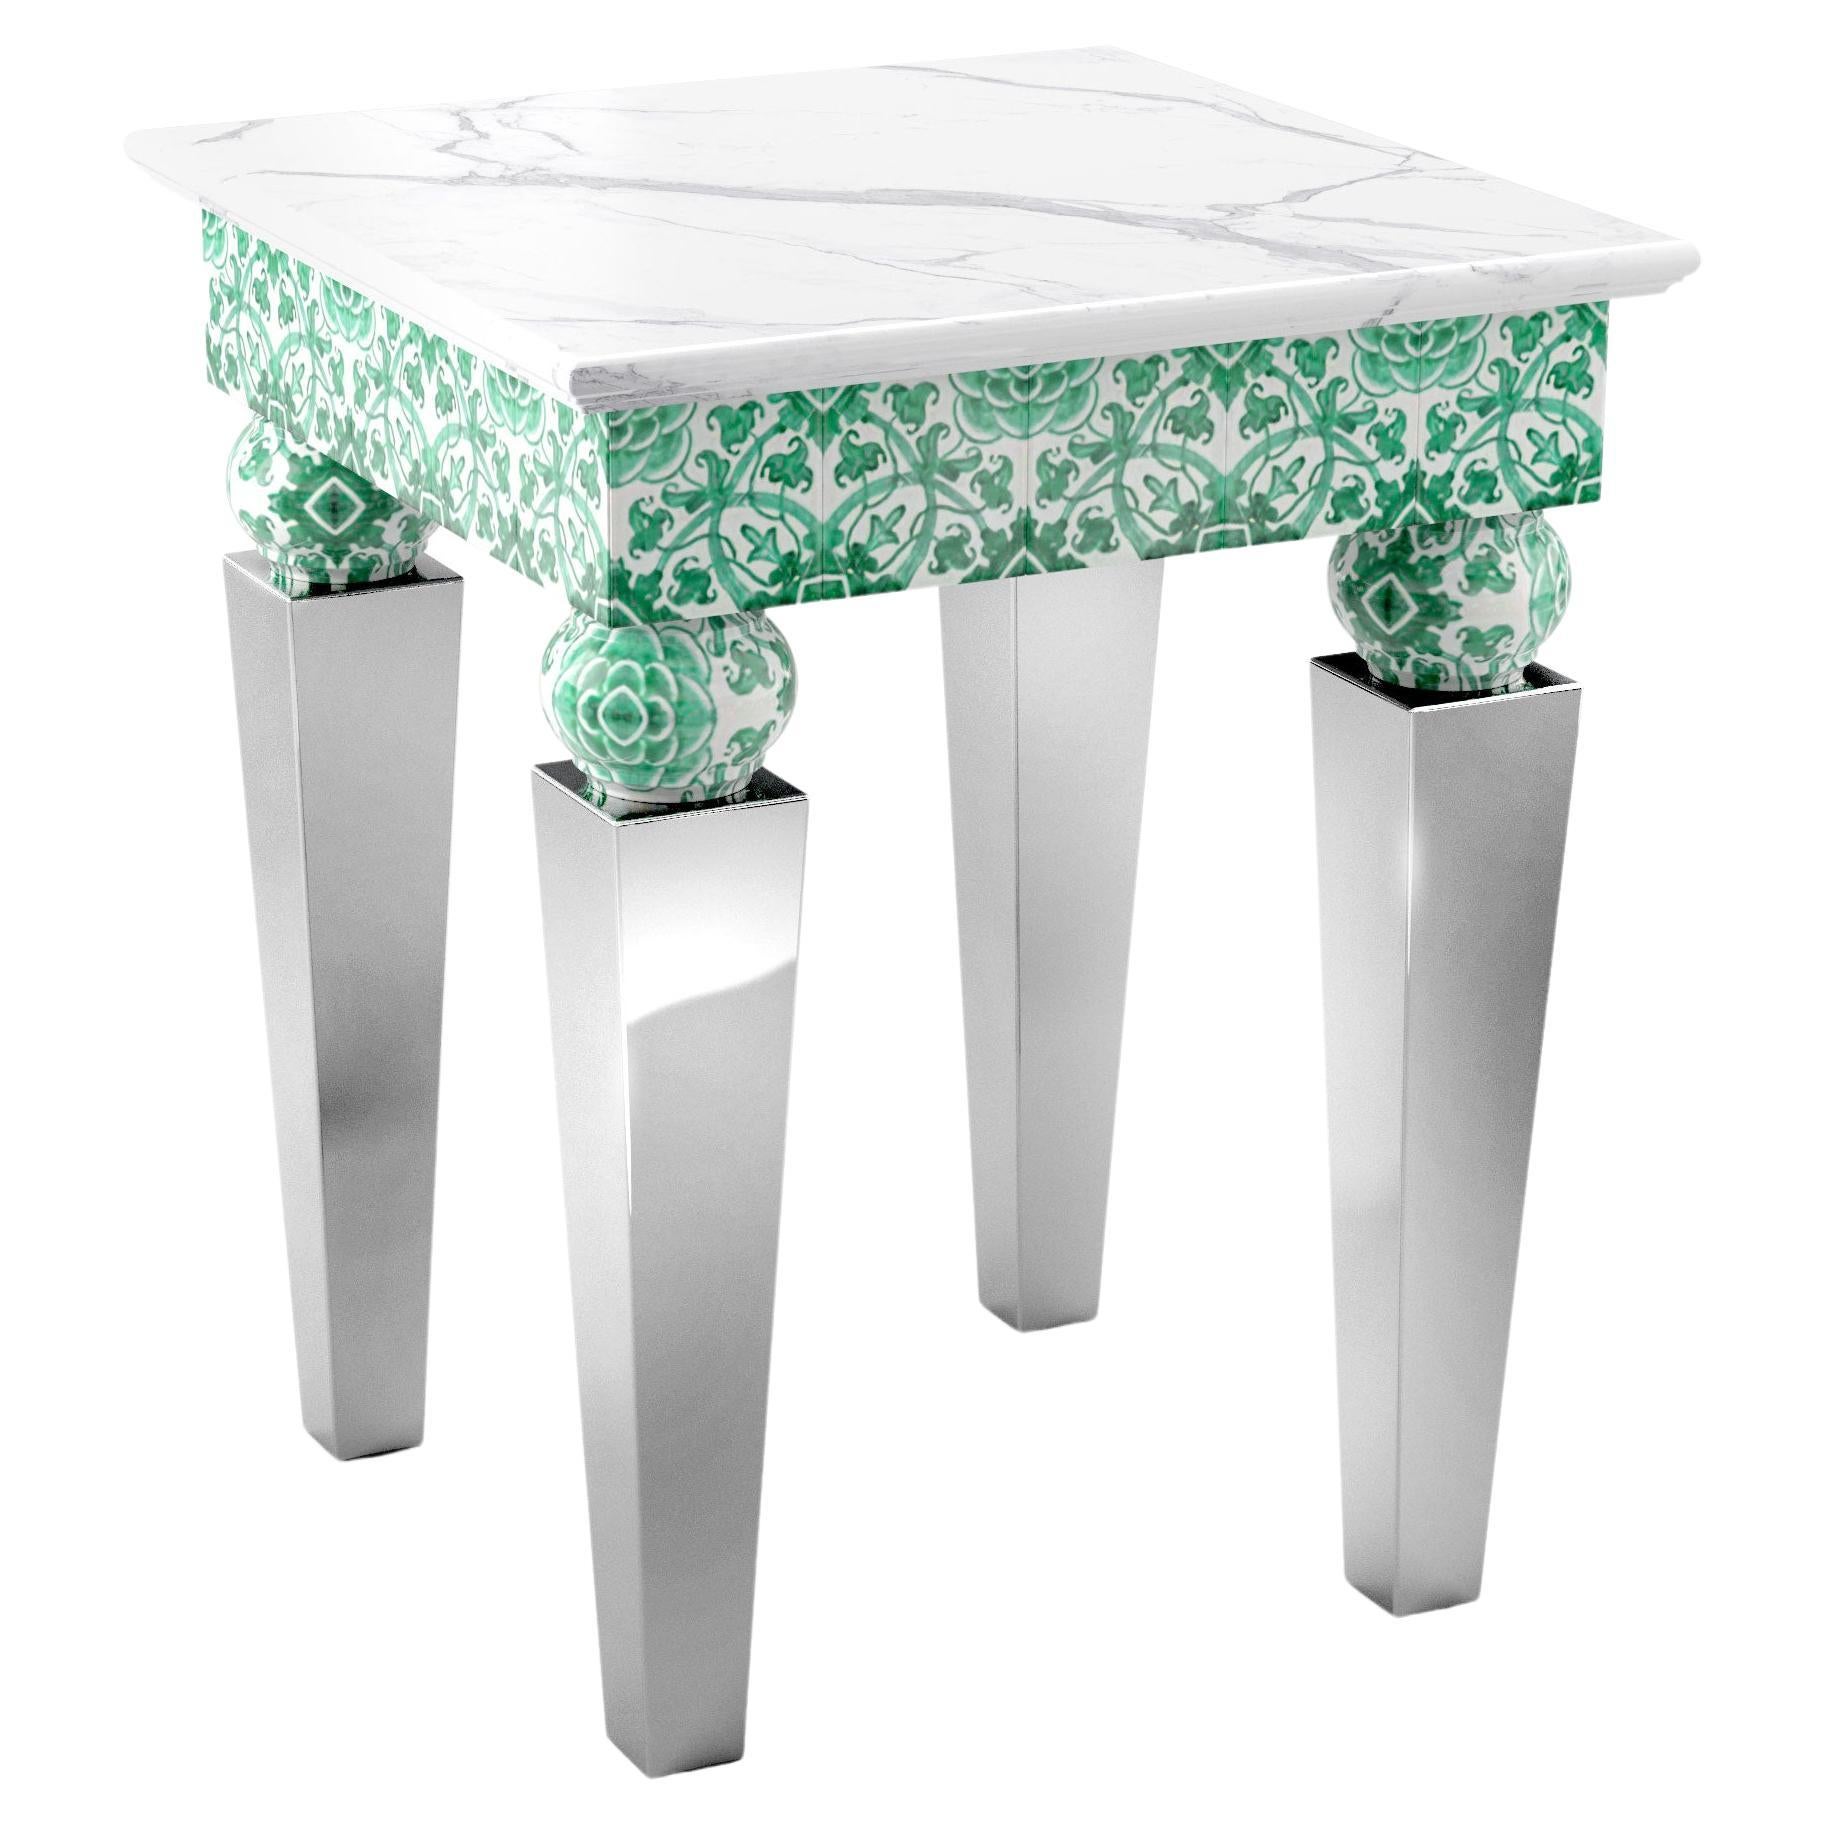 Side Table White Marble Top Mirror Steel Legs Green Majolica Tiles, Also Outdoor